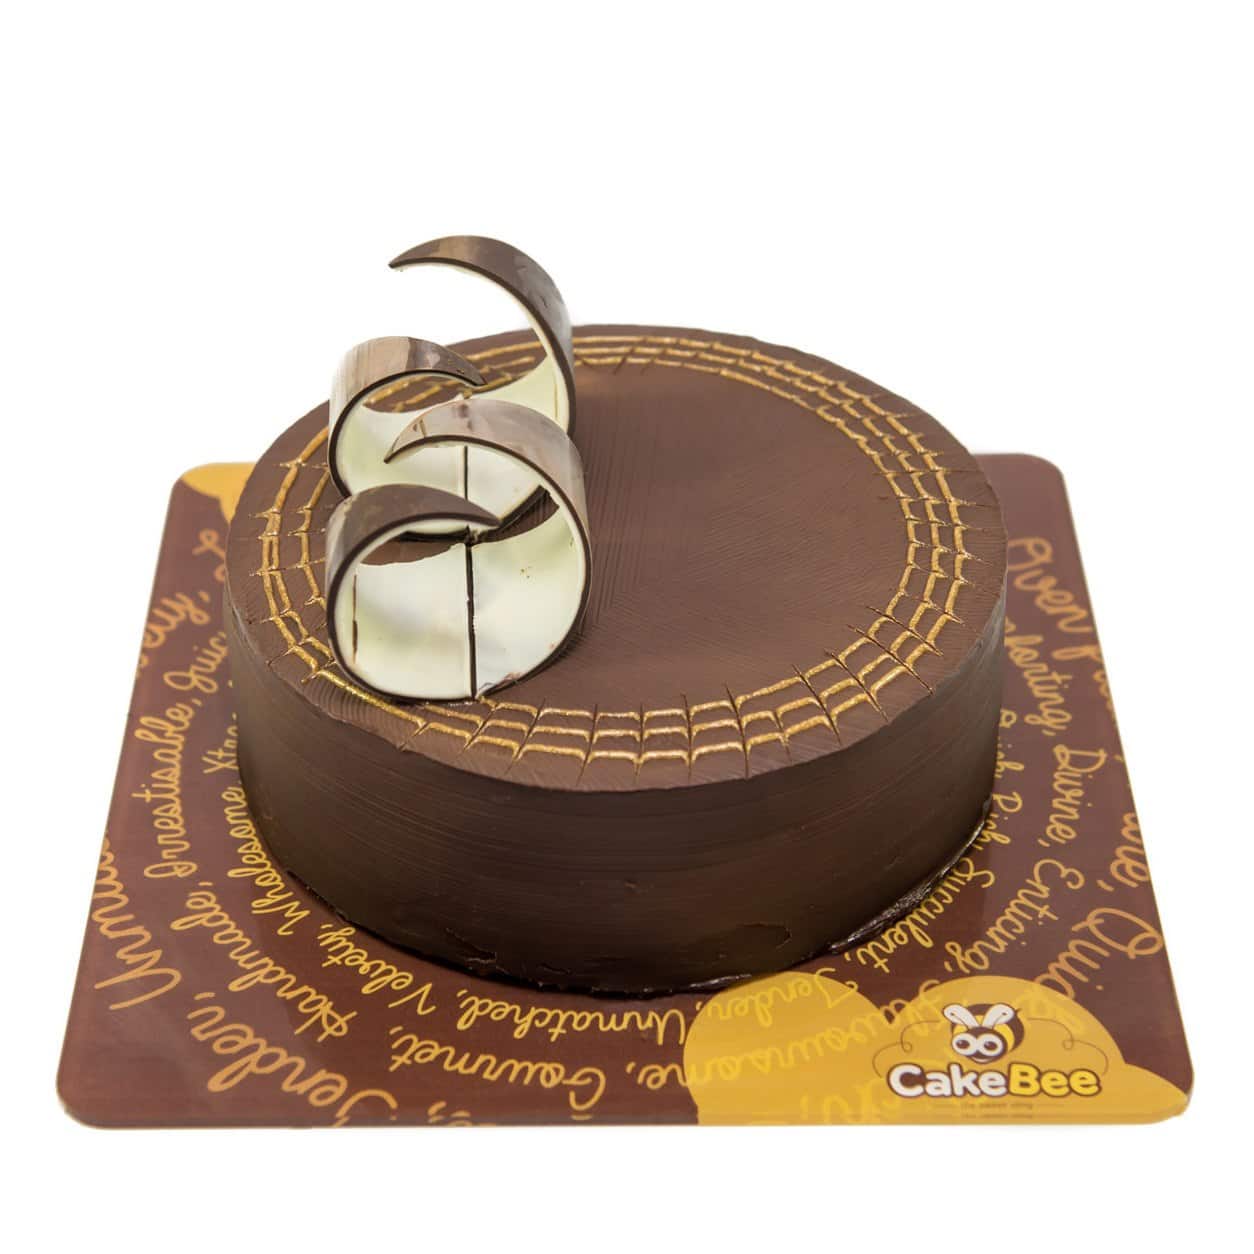 Which is the best cake delivery service in Chennai? - Quora